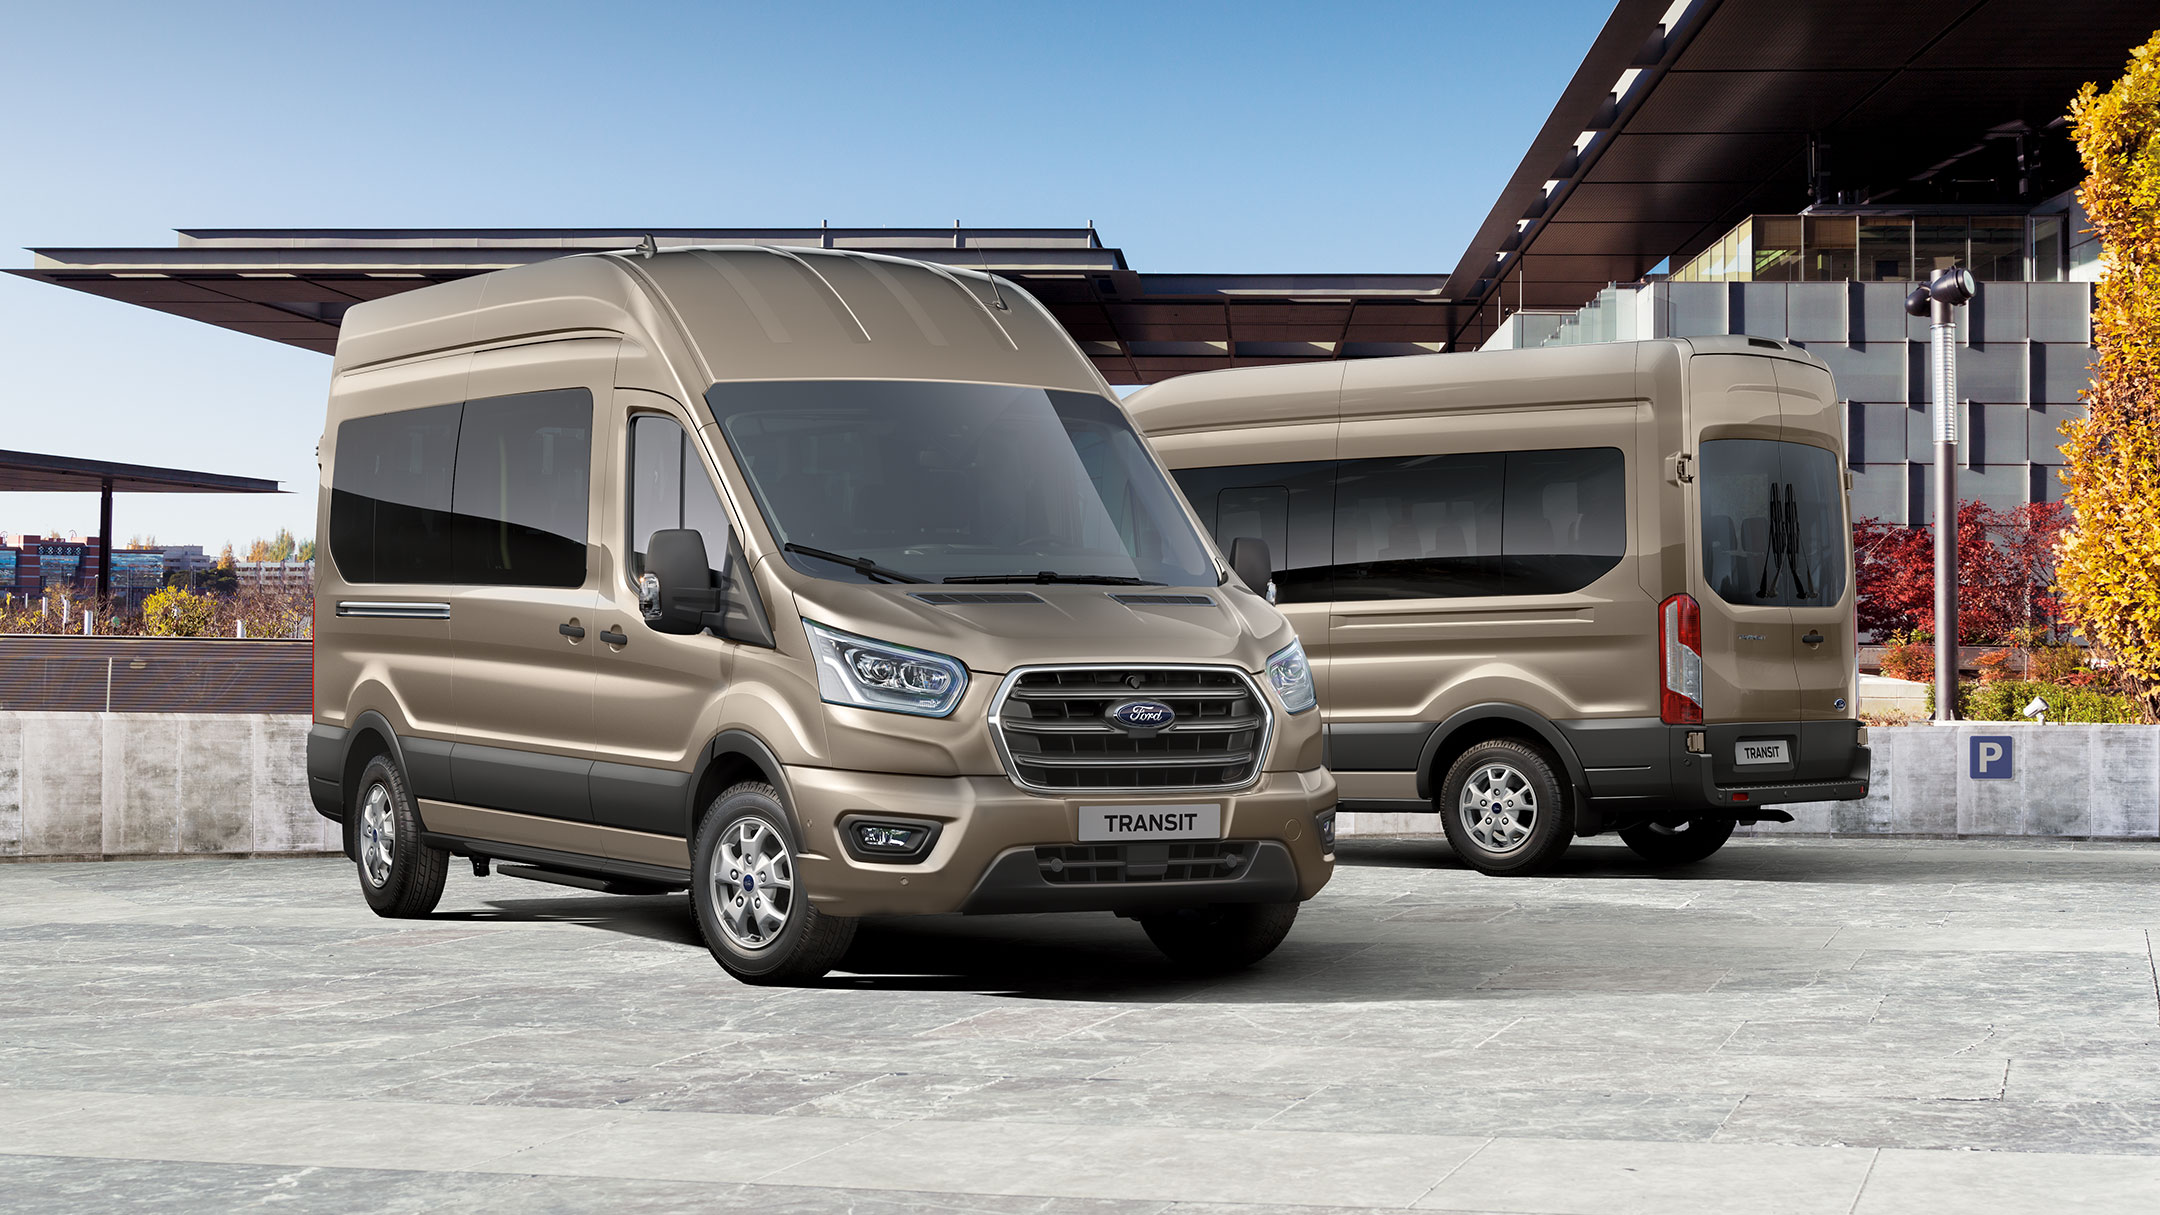 Two gold Ford Transit Minibuses parked side by side